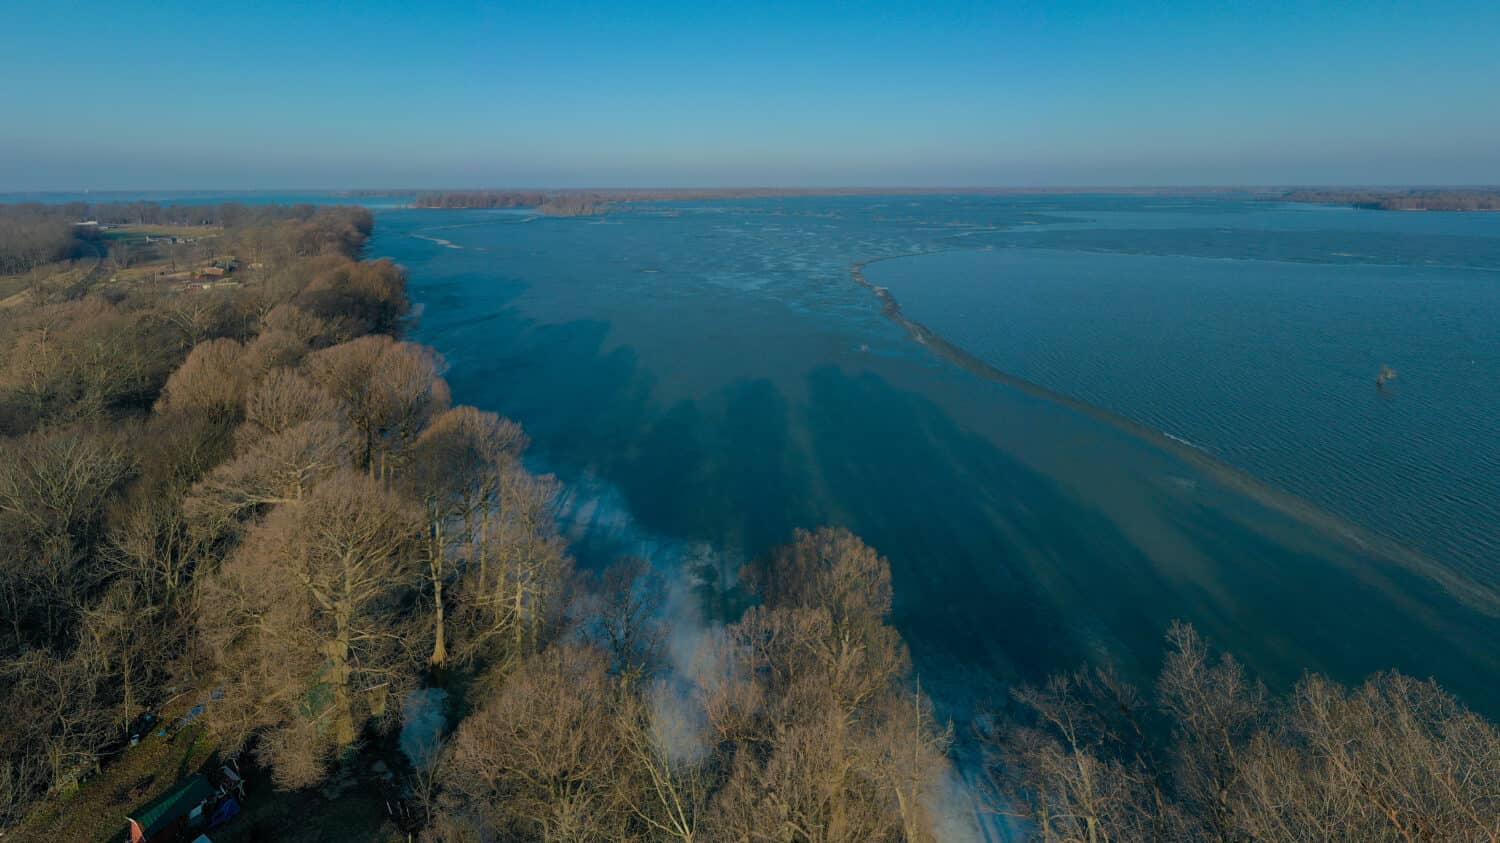 Arieal shot onto Reelfoot Lake after half of the ice melted when the Lake froze over during the winter storm in February 2021